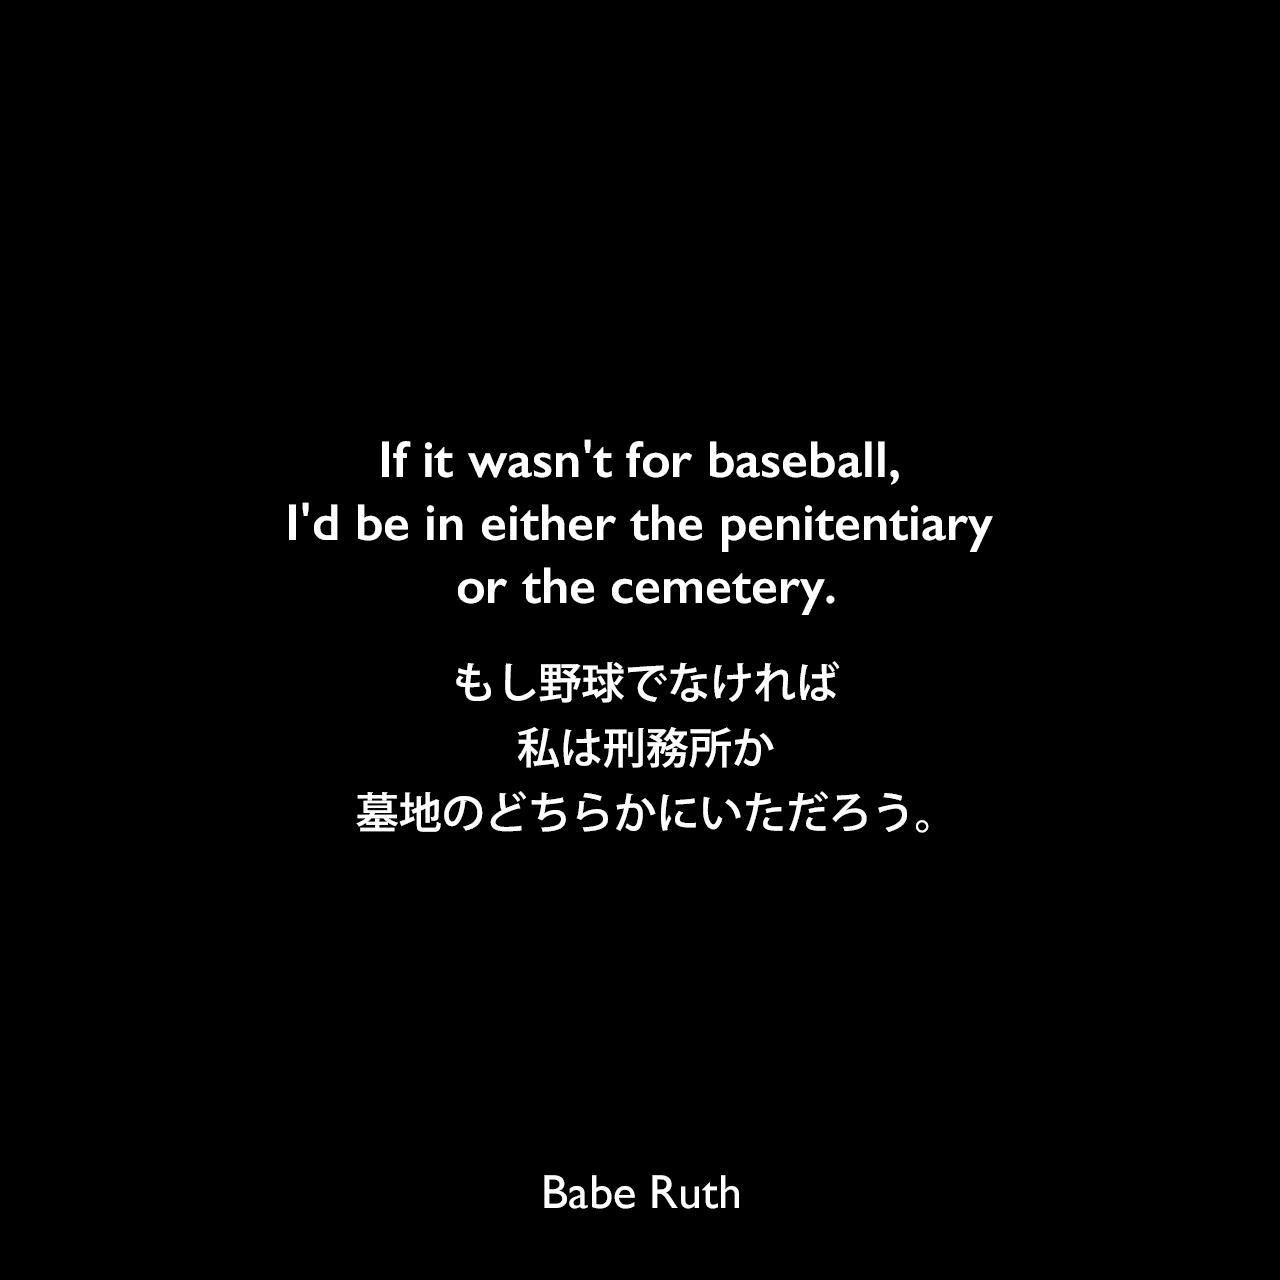 If it wasn't for baseball, I'd be in either the penitentiary or the cemetery.もし野球でなければ、私は刑務所か墓地のどちらかにいただろう。Babe Ruth